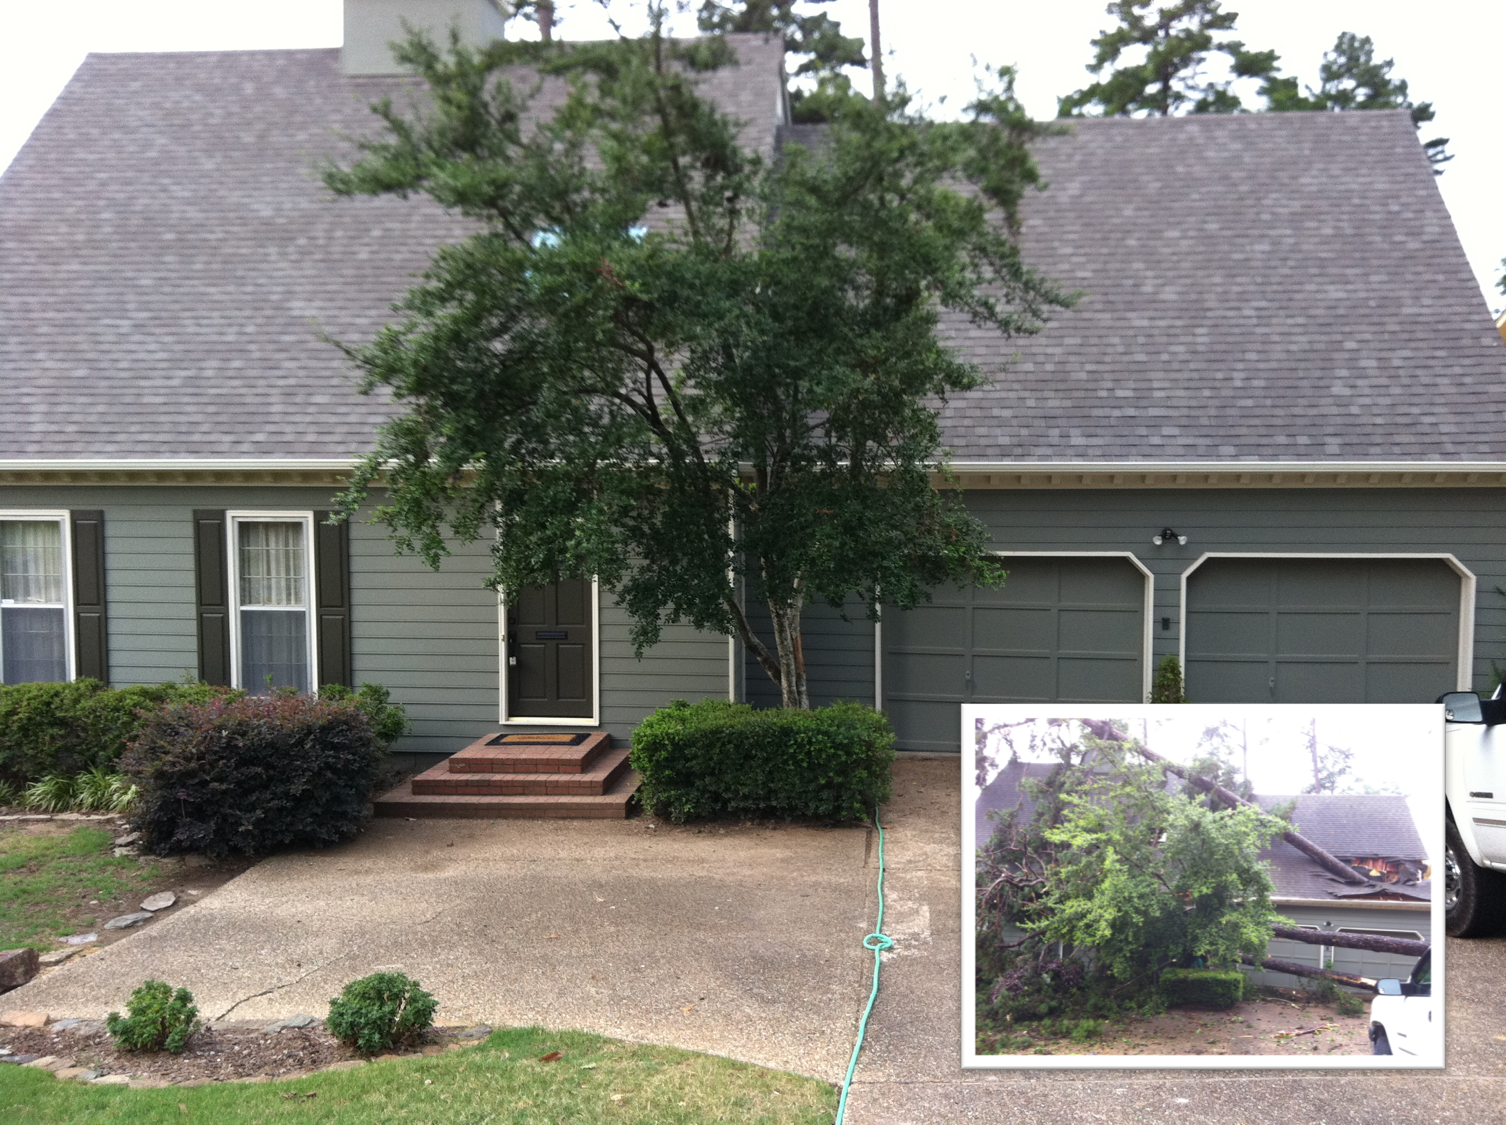 Before and after picture of storm damage on residential house